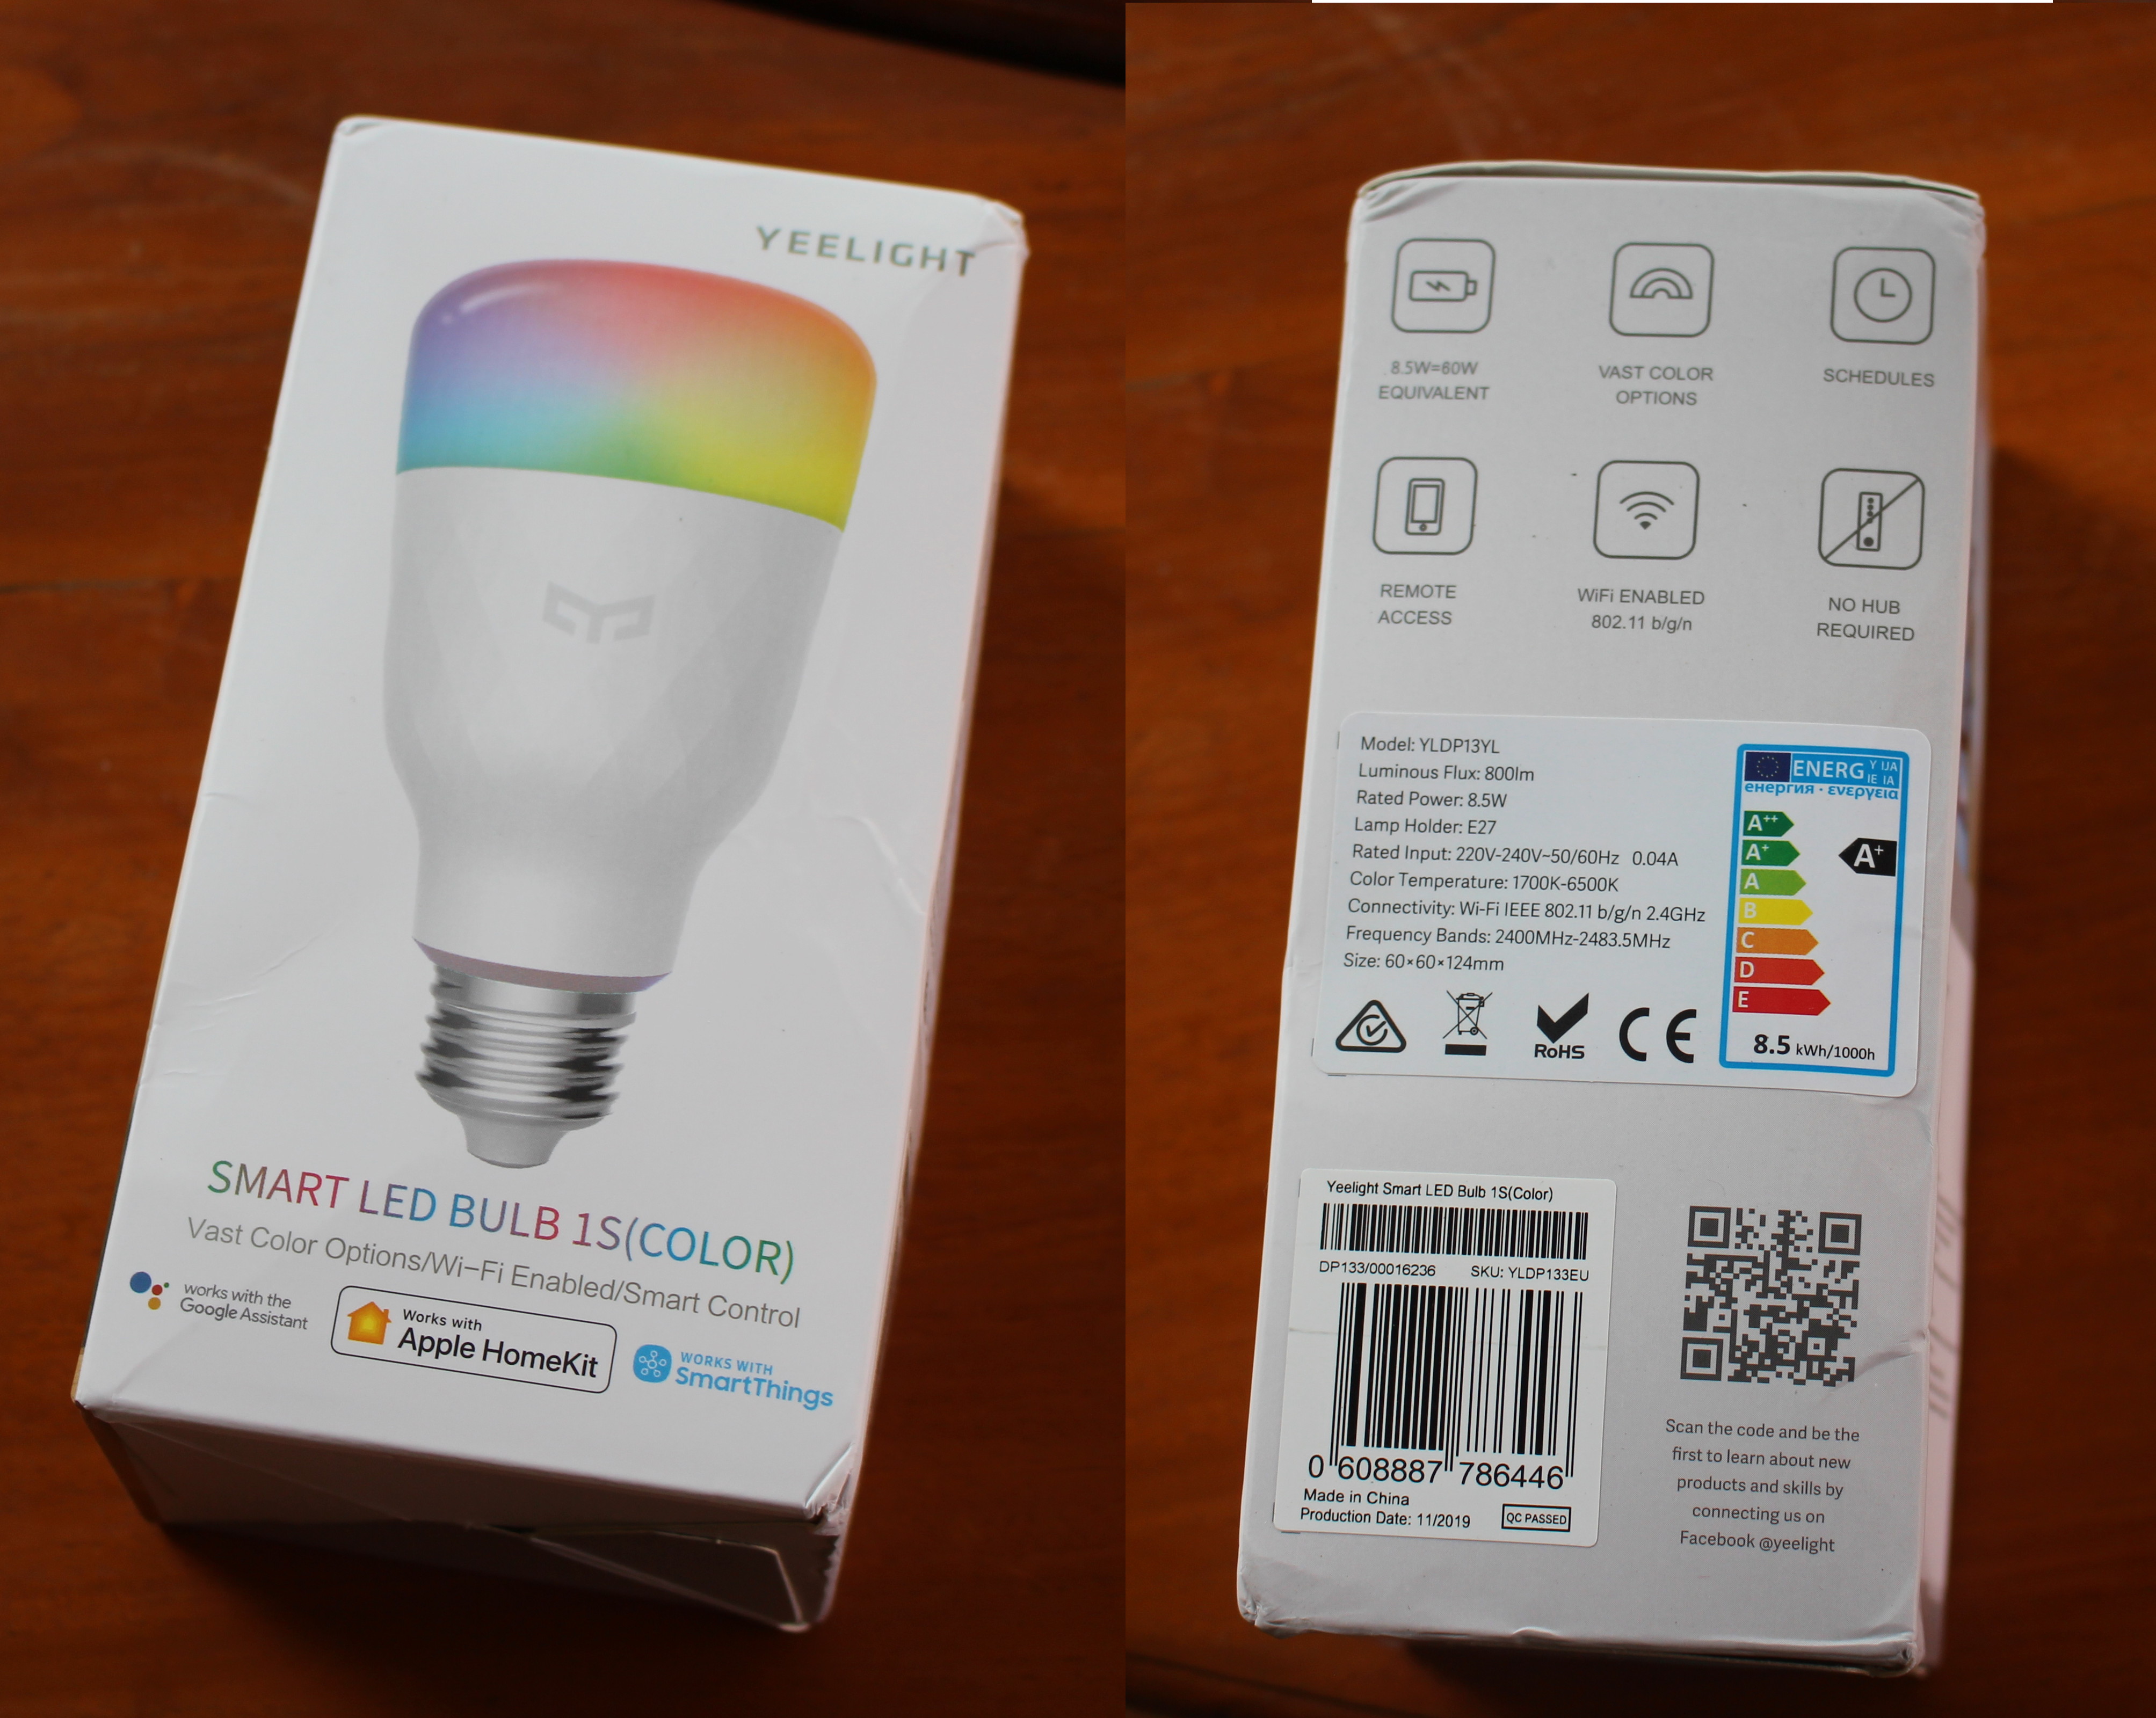 Yeelight Smart LED Bulb 1S (Color) Review with Android App and Google